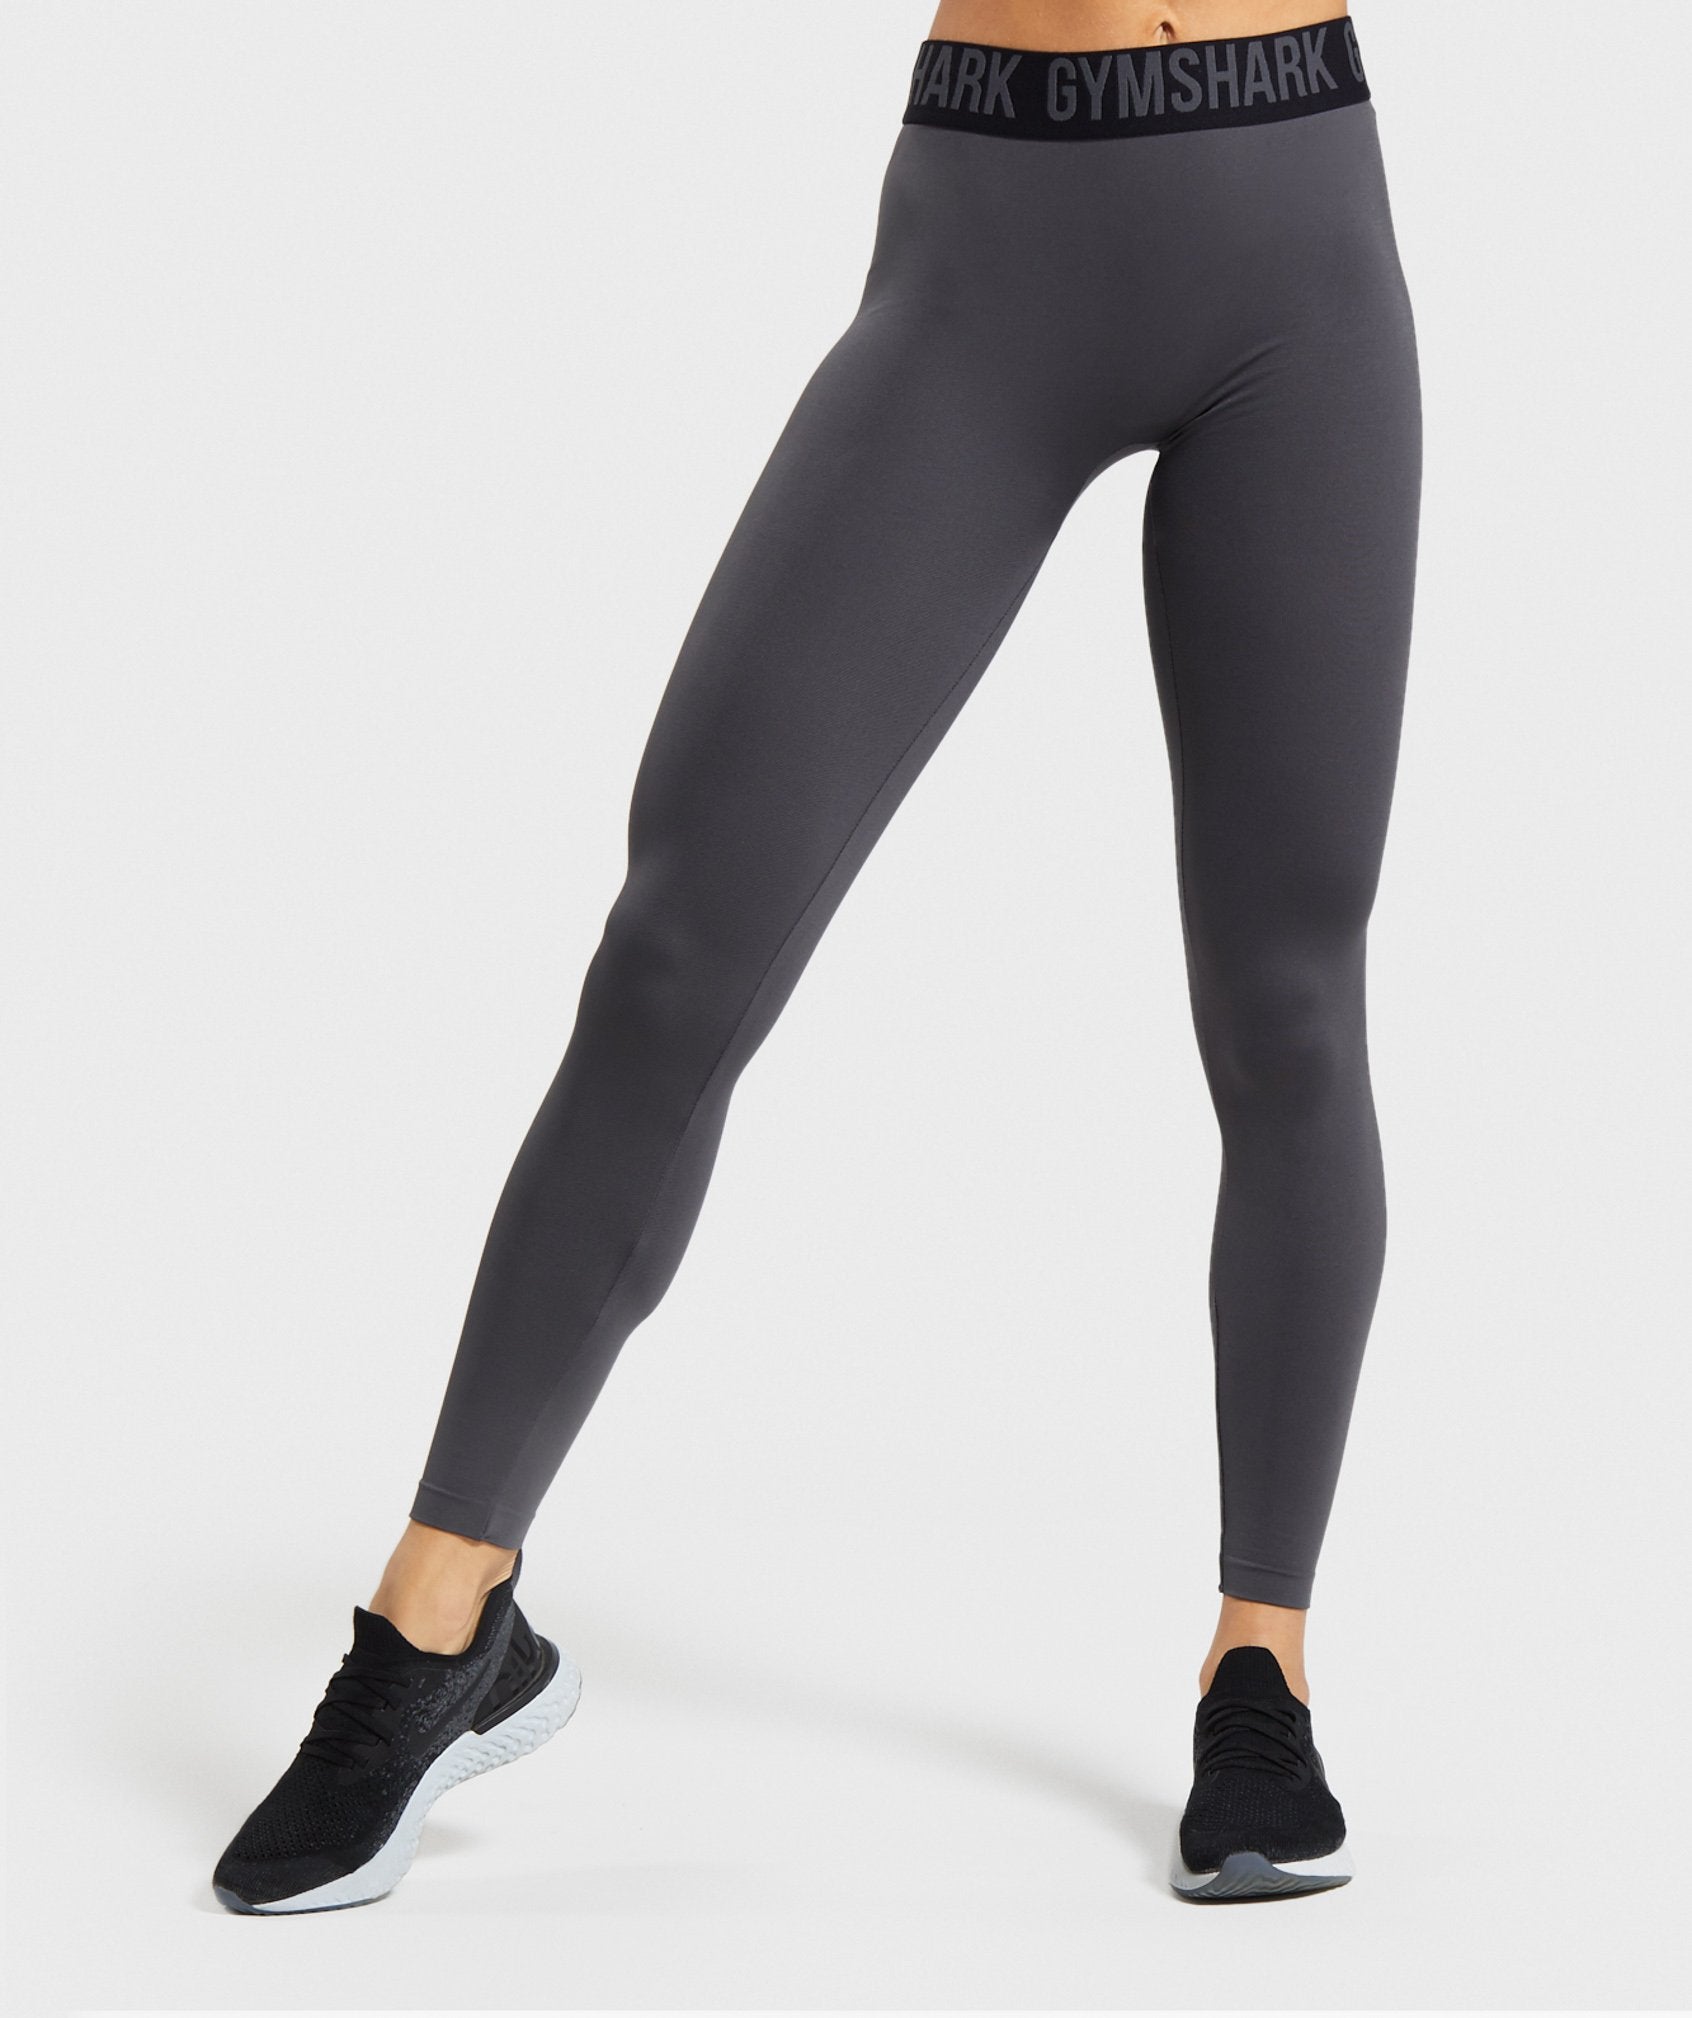 Gymshark 7/8 Leggings in Charcoal (S), Women's Fashion, Activewear on  Carousell